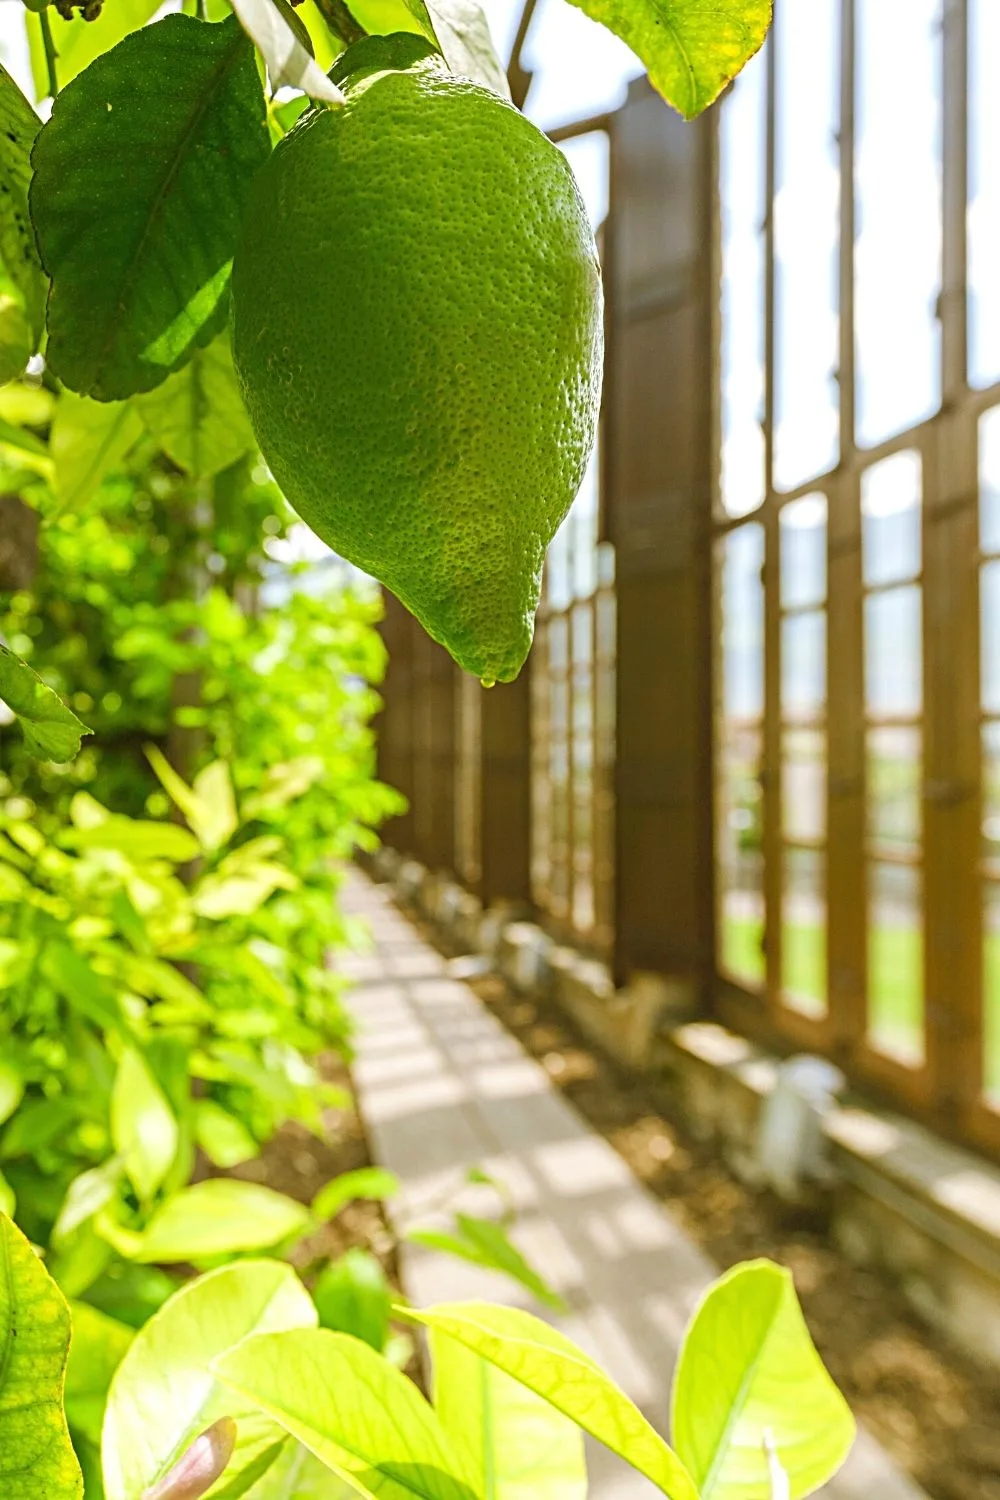 Citrus Trees is another great addition to your southeast-facing window if you're raring to plant something edible indoors